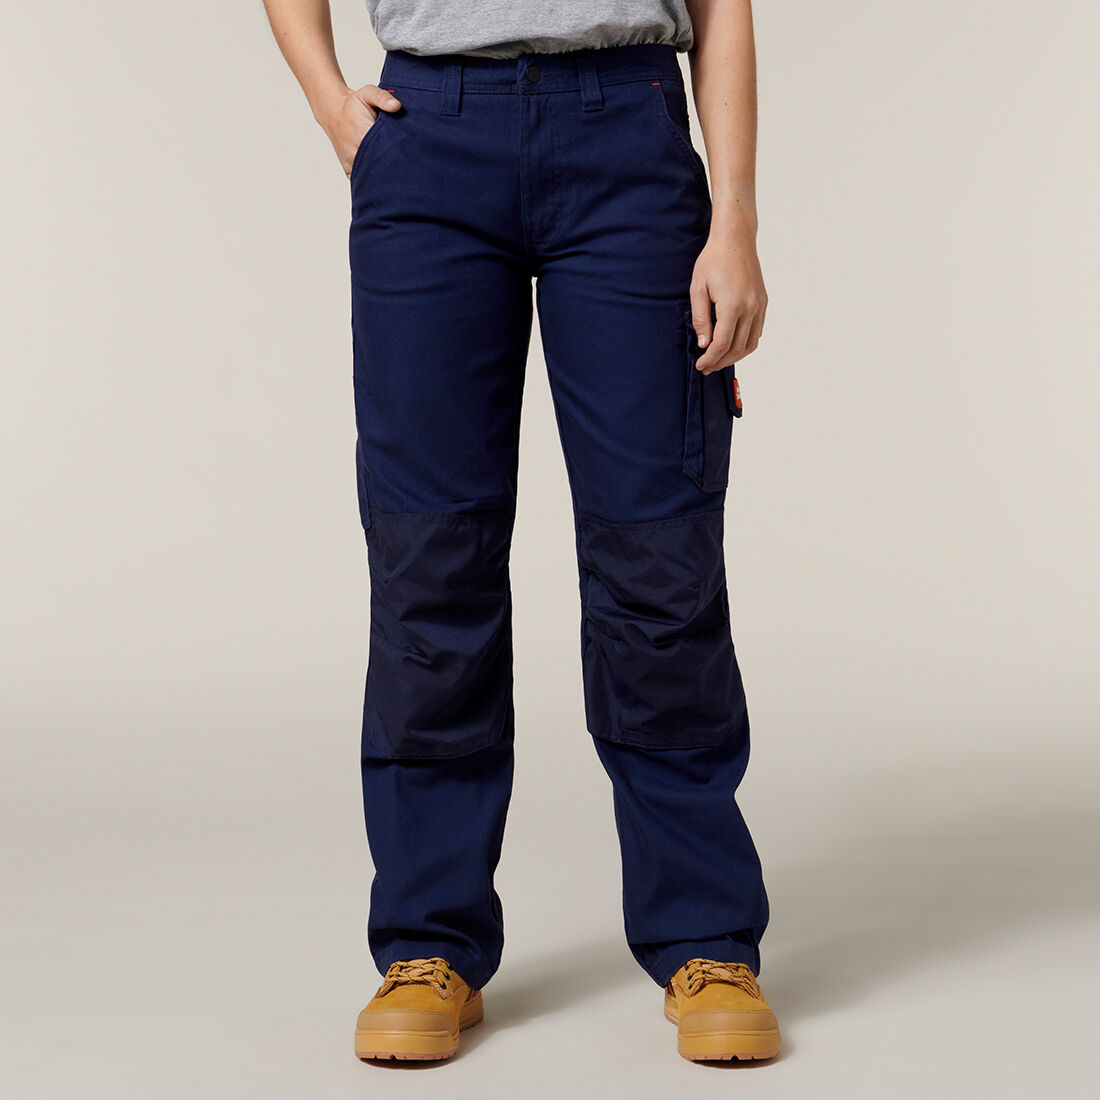 Jonsson Workwear | Women's Cargo Trousers DISCONTINUED